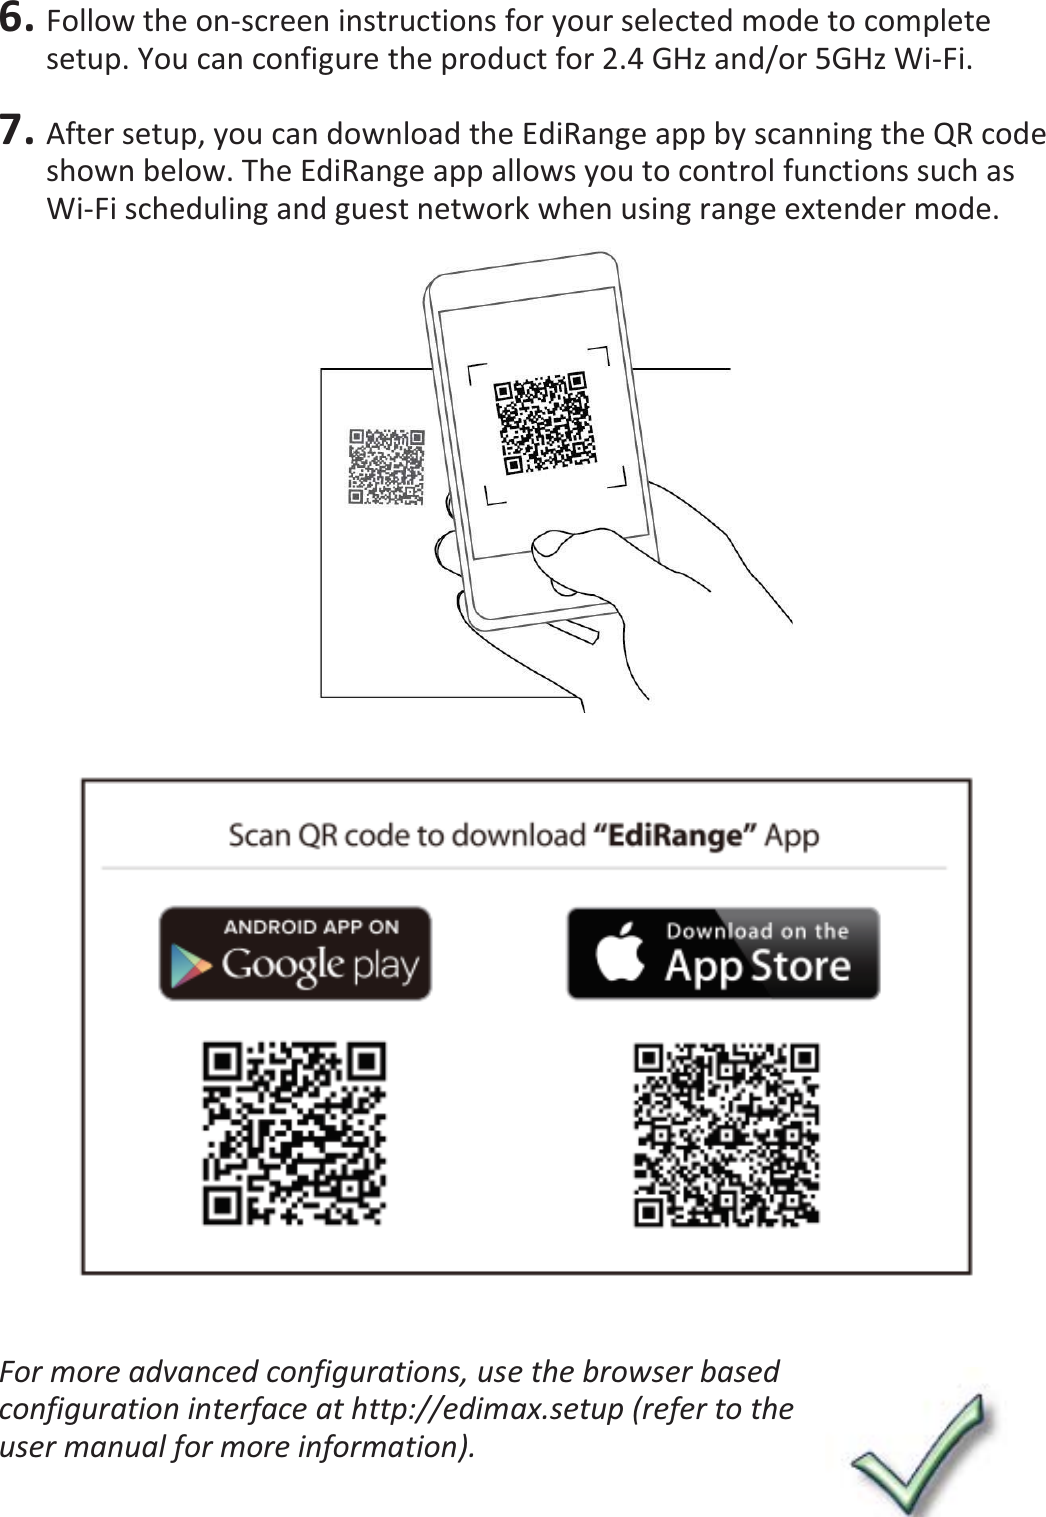 6. Follow the on-screen instructions for your selected mode to complete setup. You can configure the product for 2.4 GHz and/or 5GHz Wi-Fi.  7. After setup, you can download the EdiRange app by scanning the QR code shown below. The EdiRange app allows you to control functions such as Wi-Fi scheduling and guest network when using range extender mode.      For more advanced configurations, use the browser based configuration interface at http://edimax.setup (refer to the user manual for more information). 